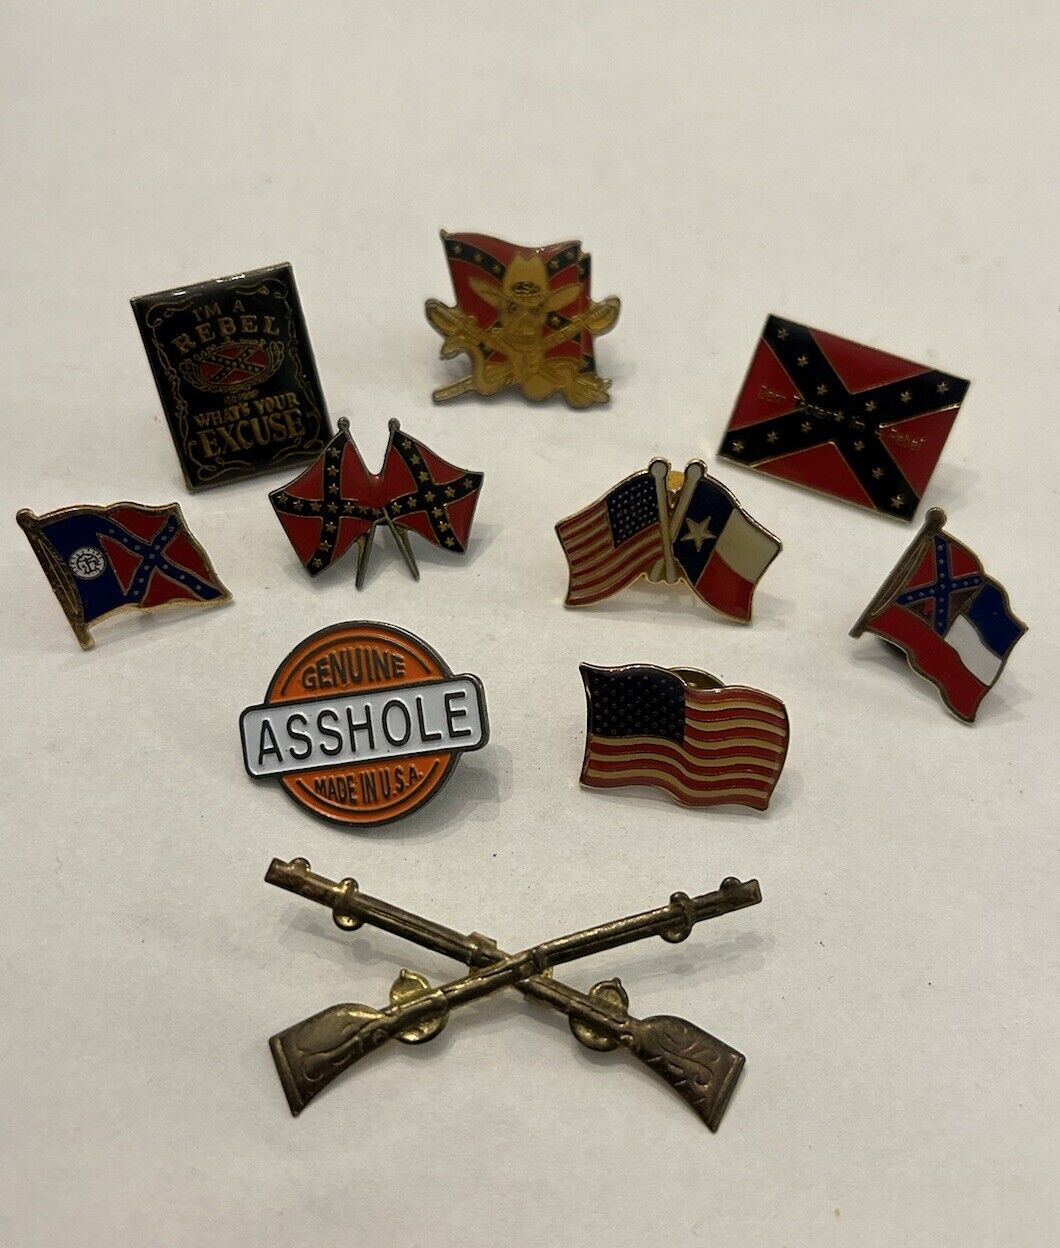 Vintage CONFEDERATE Rebel SOLDIER Pin Collection USA Display South Duke Hazzard